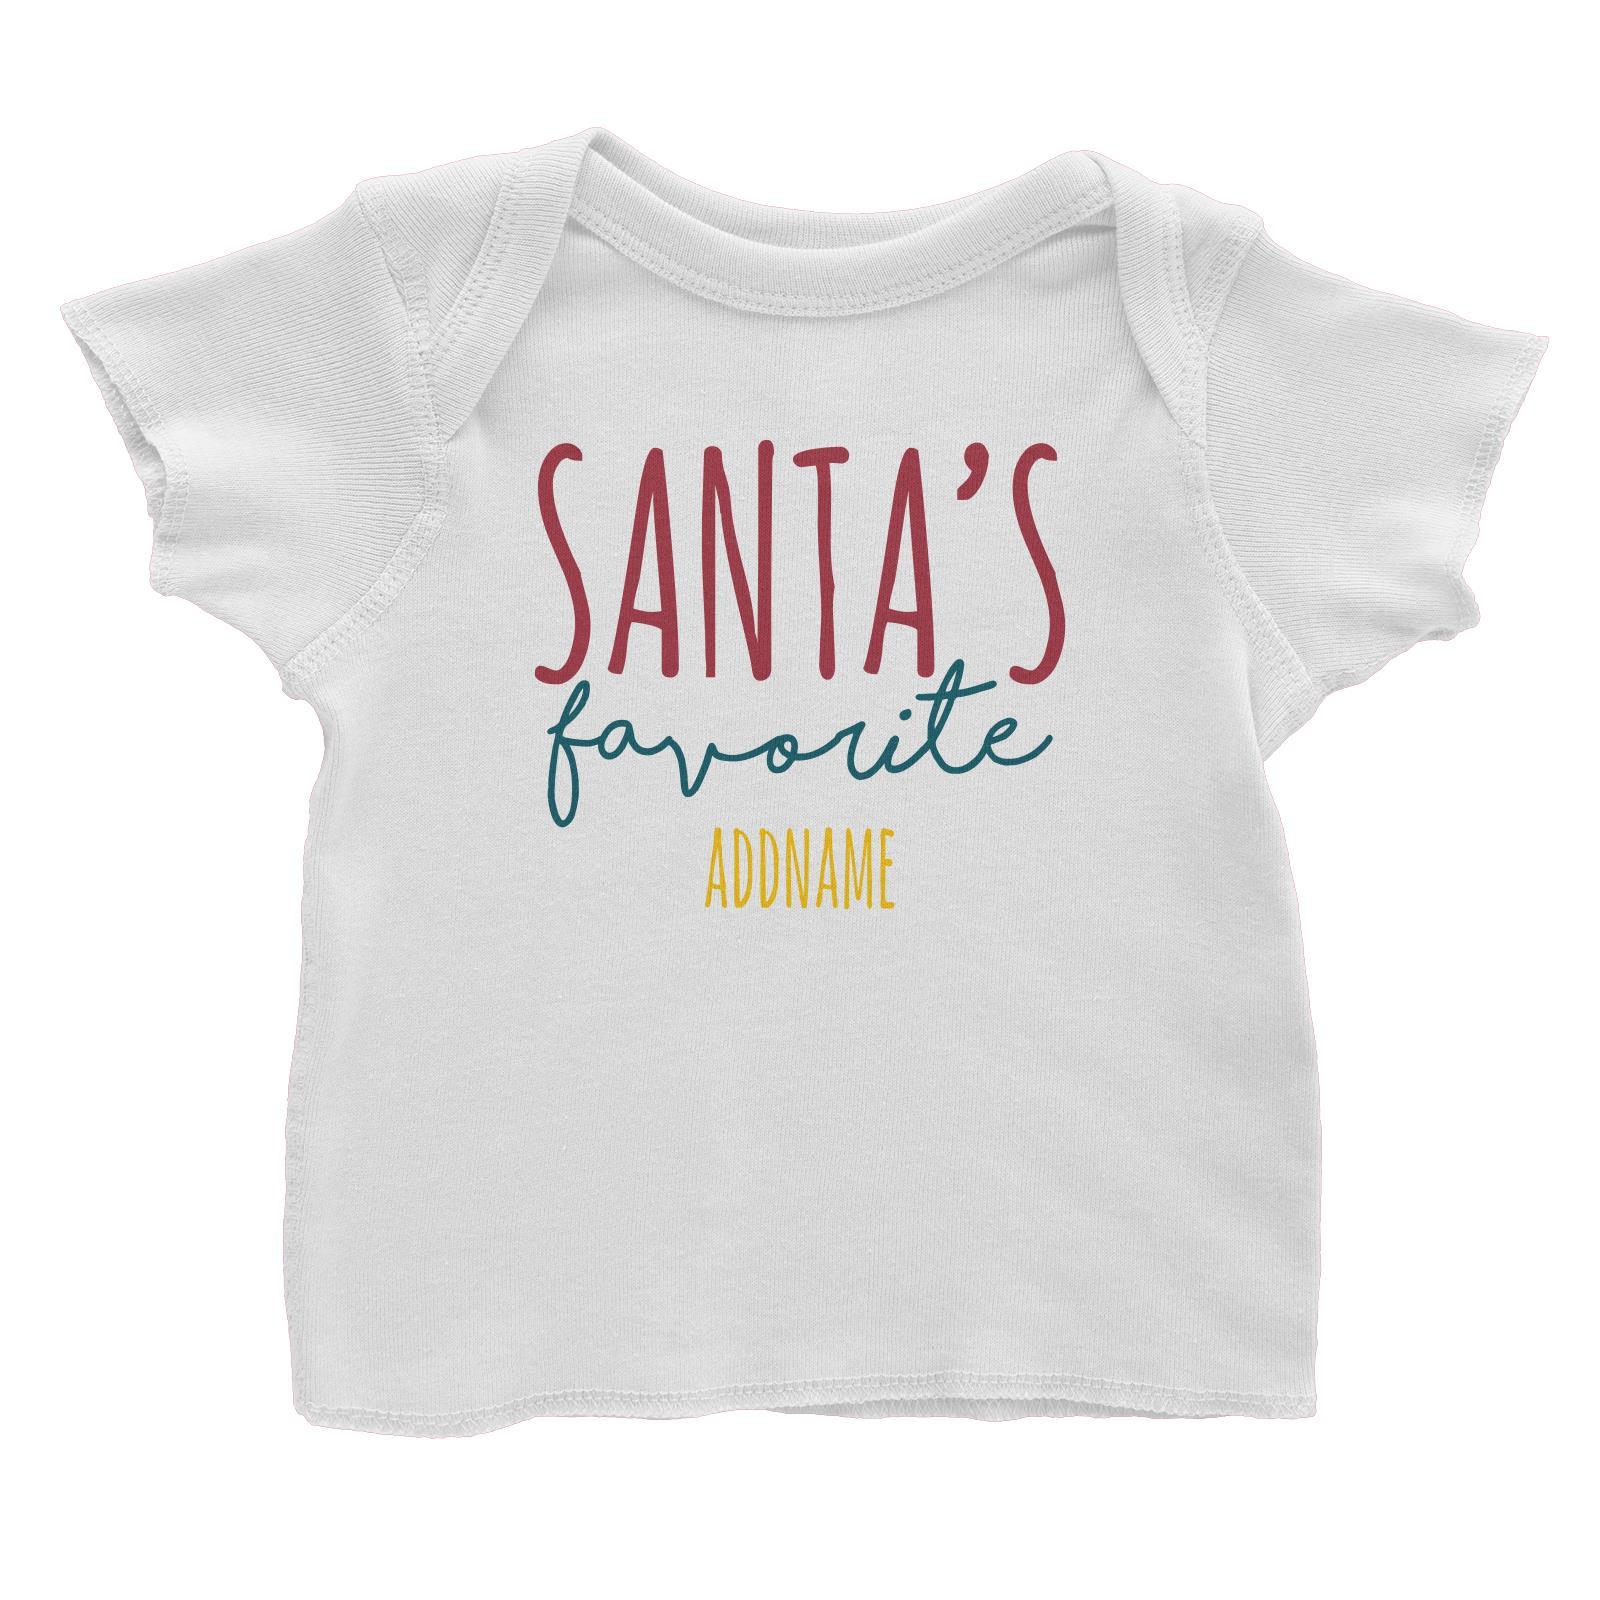 Santa's Favourite Lettering Addname Baby T-Shirt Christmas Matching Family Personalizable Designs